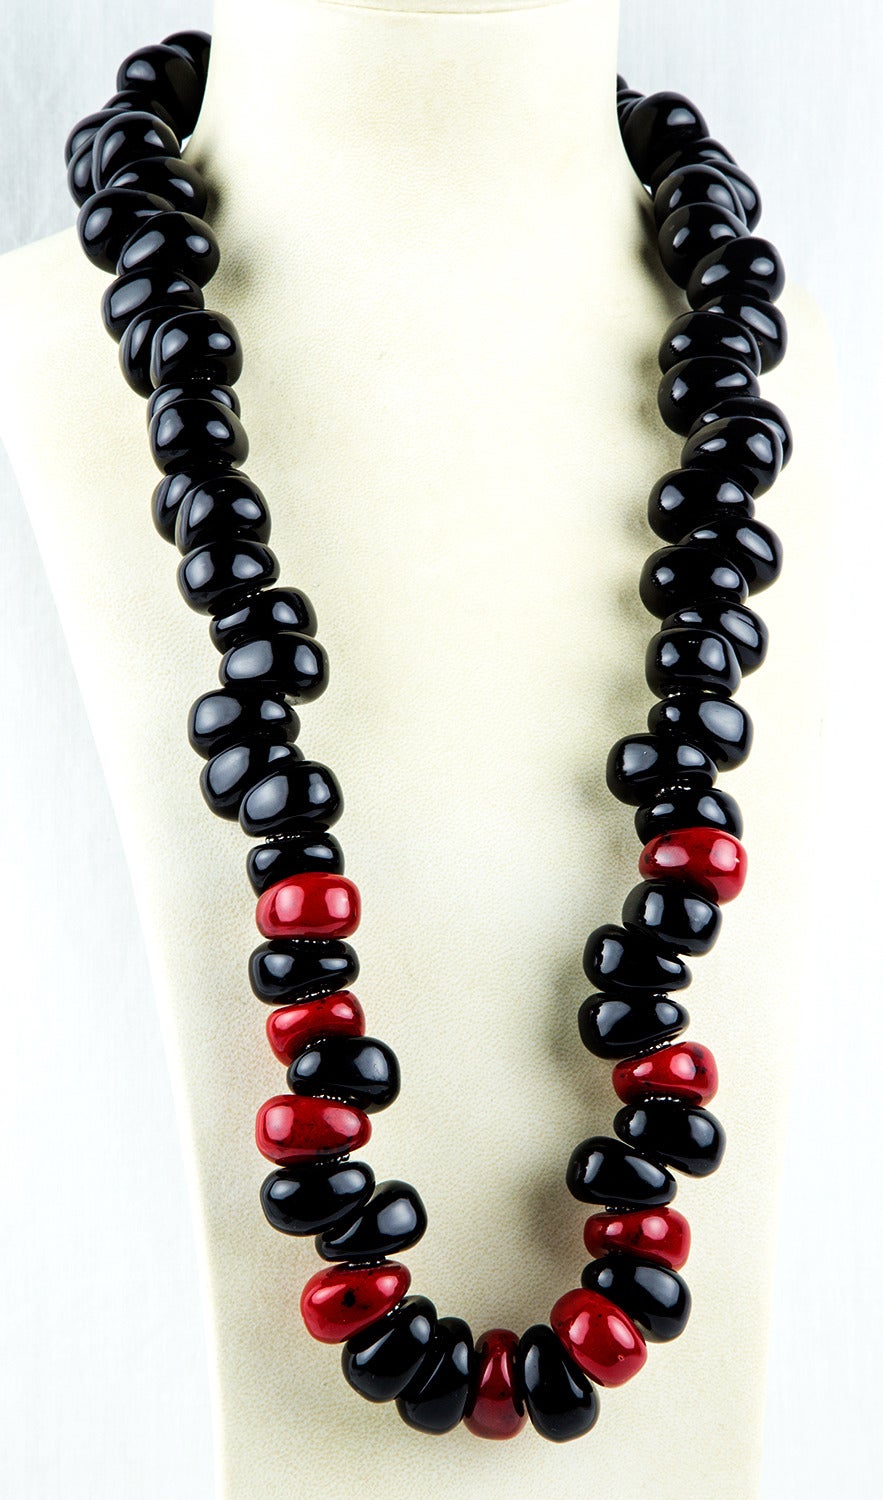 Fabulously Dramatic Black and Red Celluloid Necklace, the oval curved celluloid discs, each measuring an impressive 26. 5mm x 22mm are inter-spaced with flat silver rondelles. The necklace measures approx. 36” long. C1980s. Chic and Show Stopping